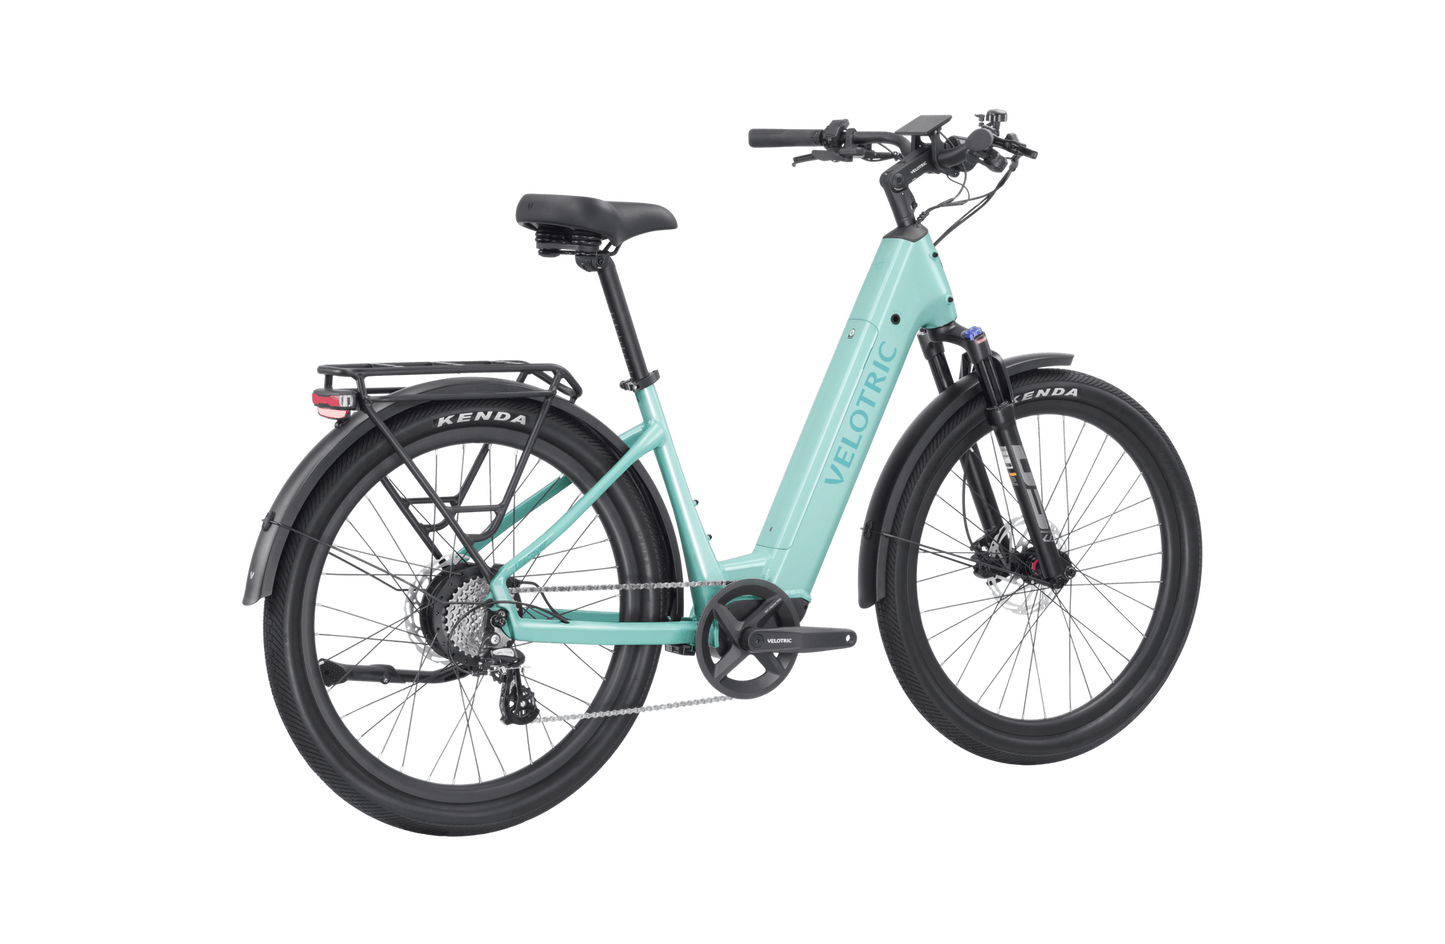 Electric bicycle in turquoise and black with a rear rack and disc brakes, featuring the Velotric Discover 2 design.